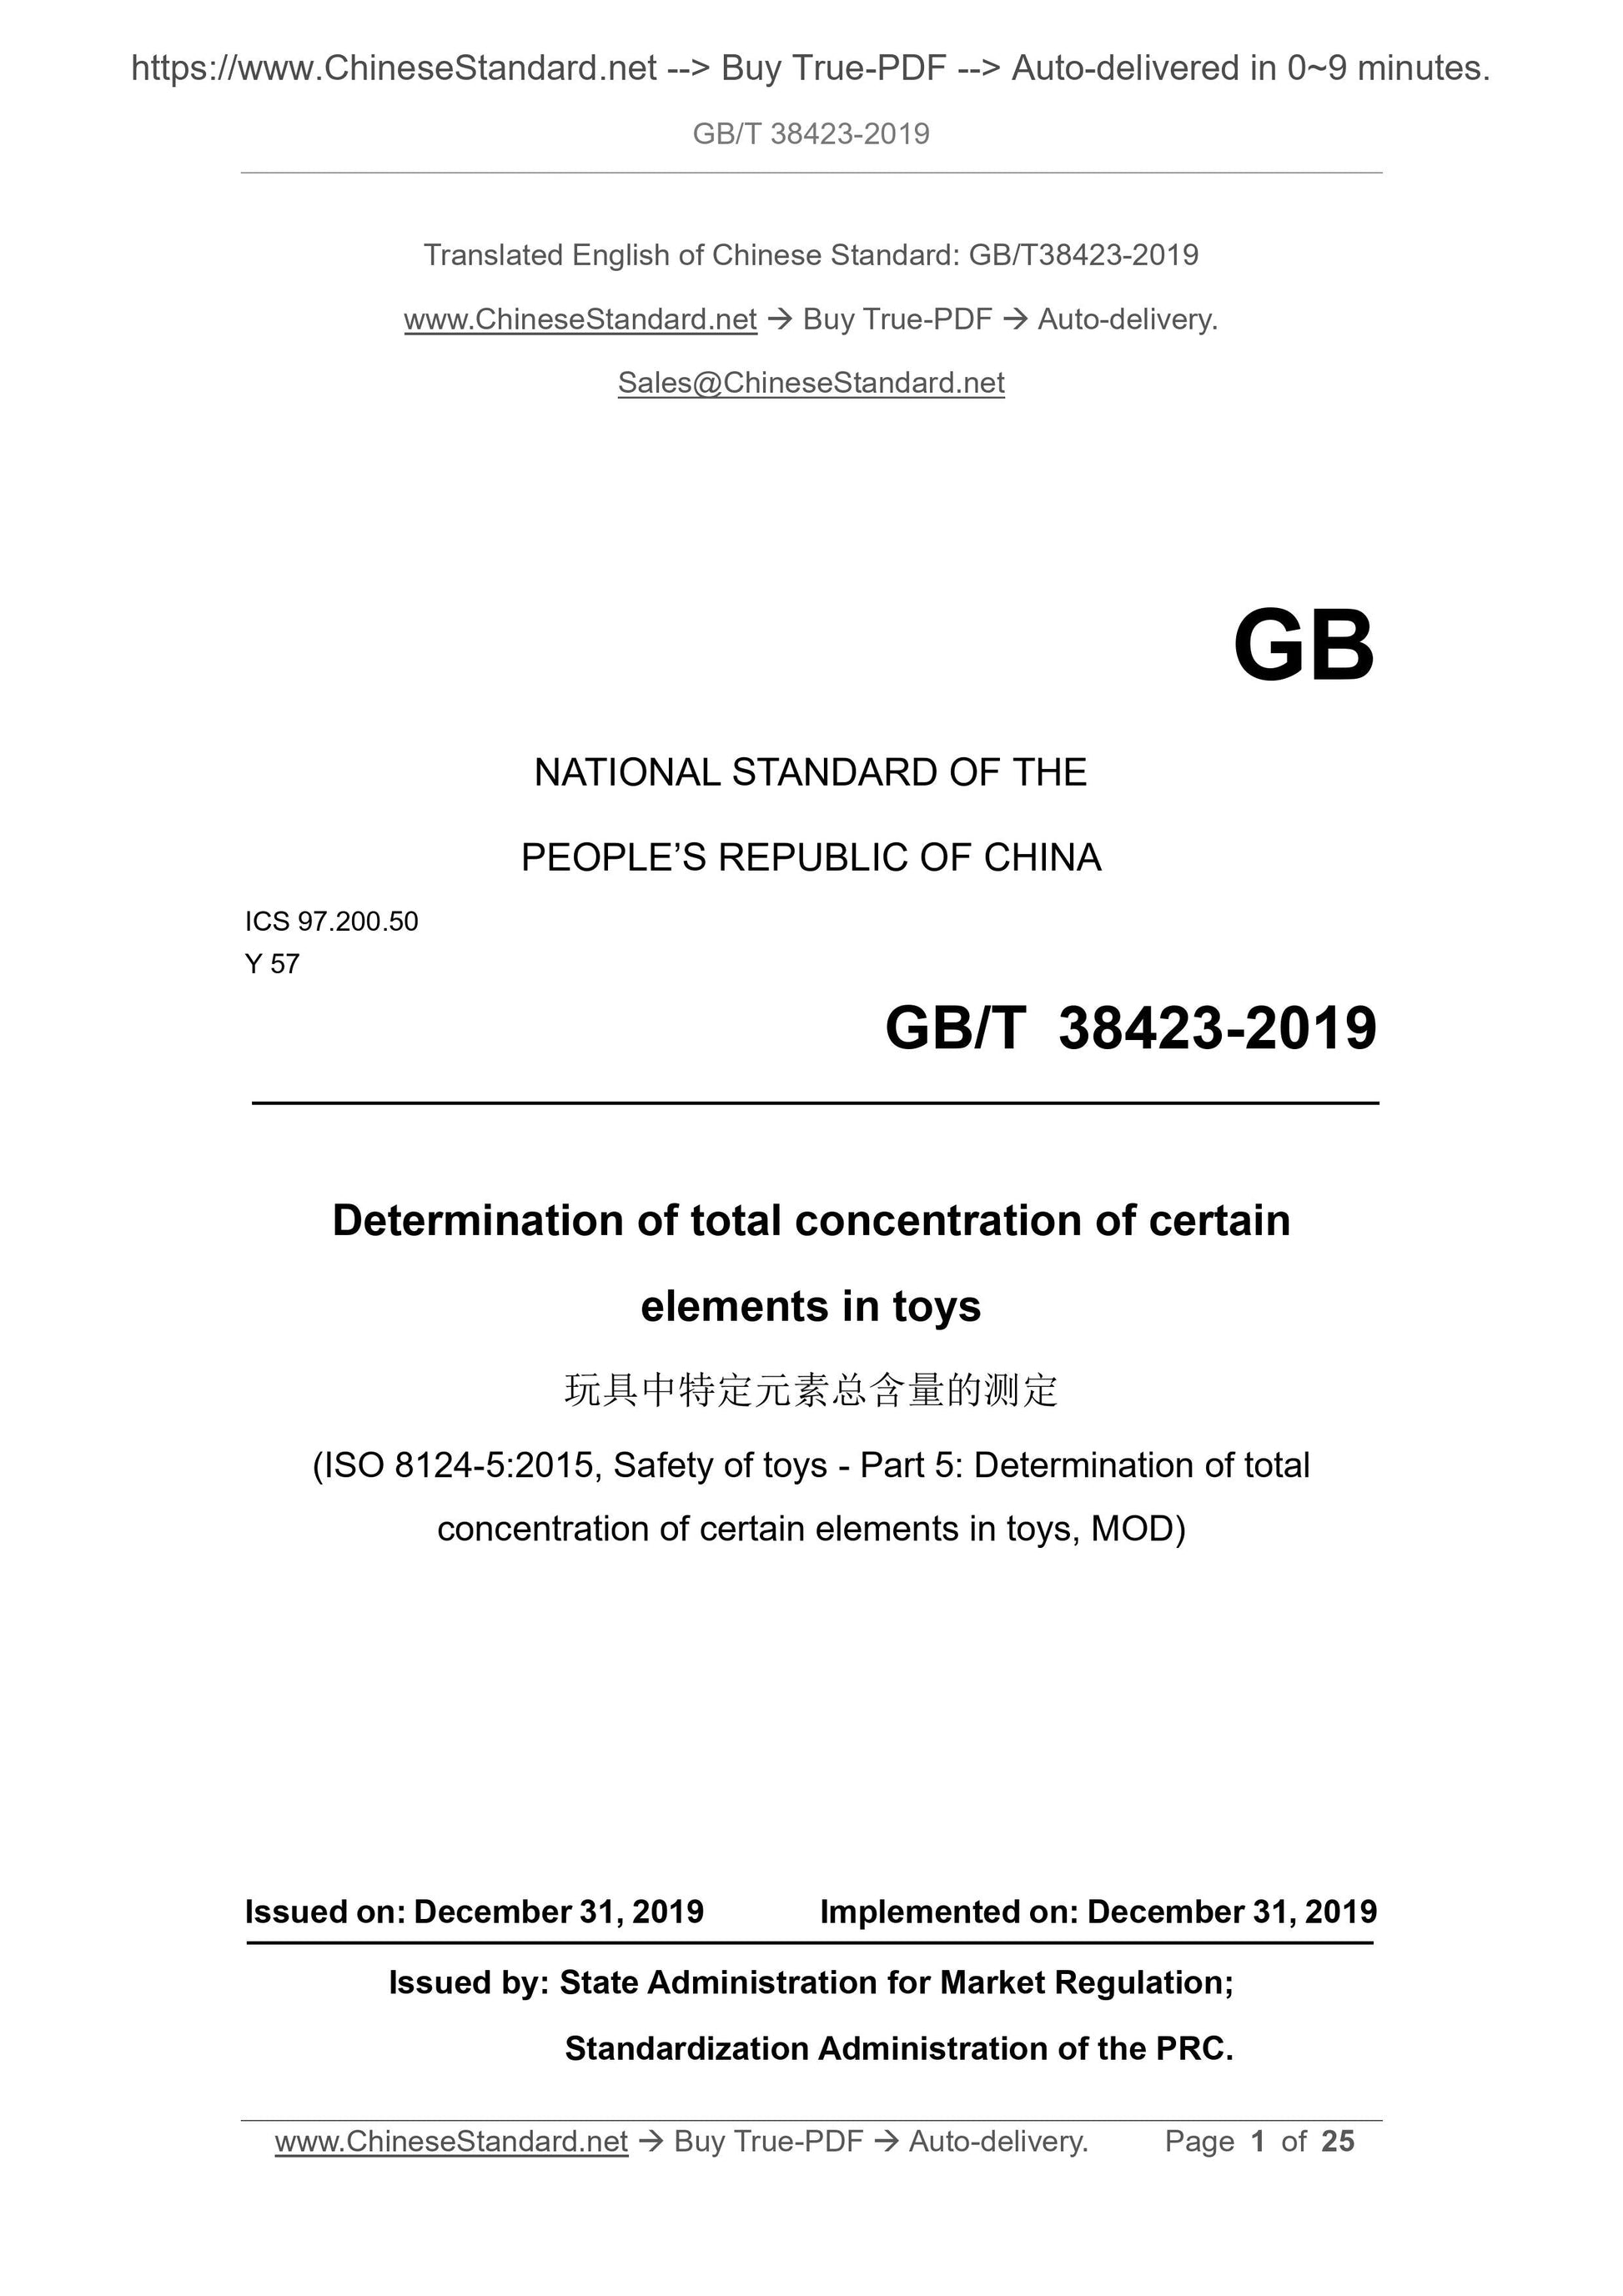 GB/T 38423-2019 Page 1